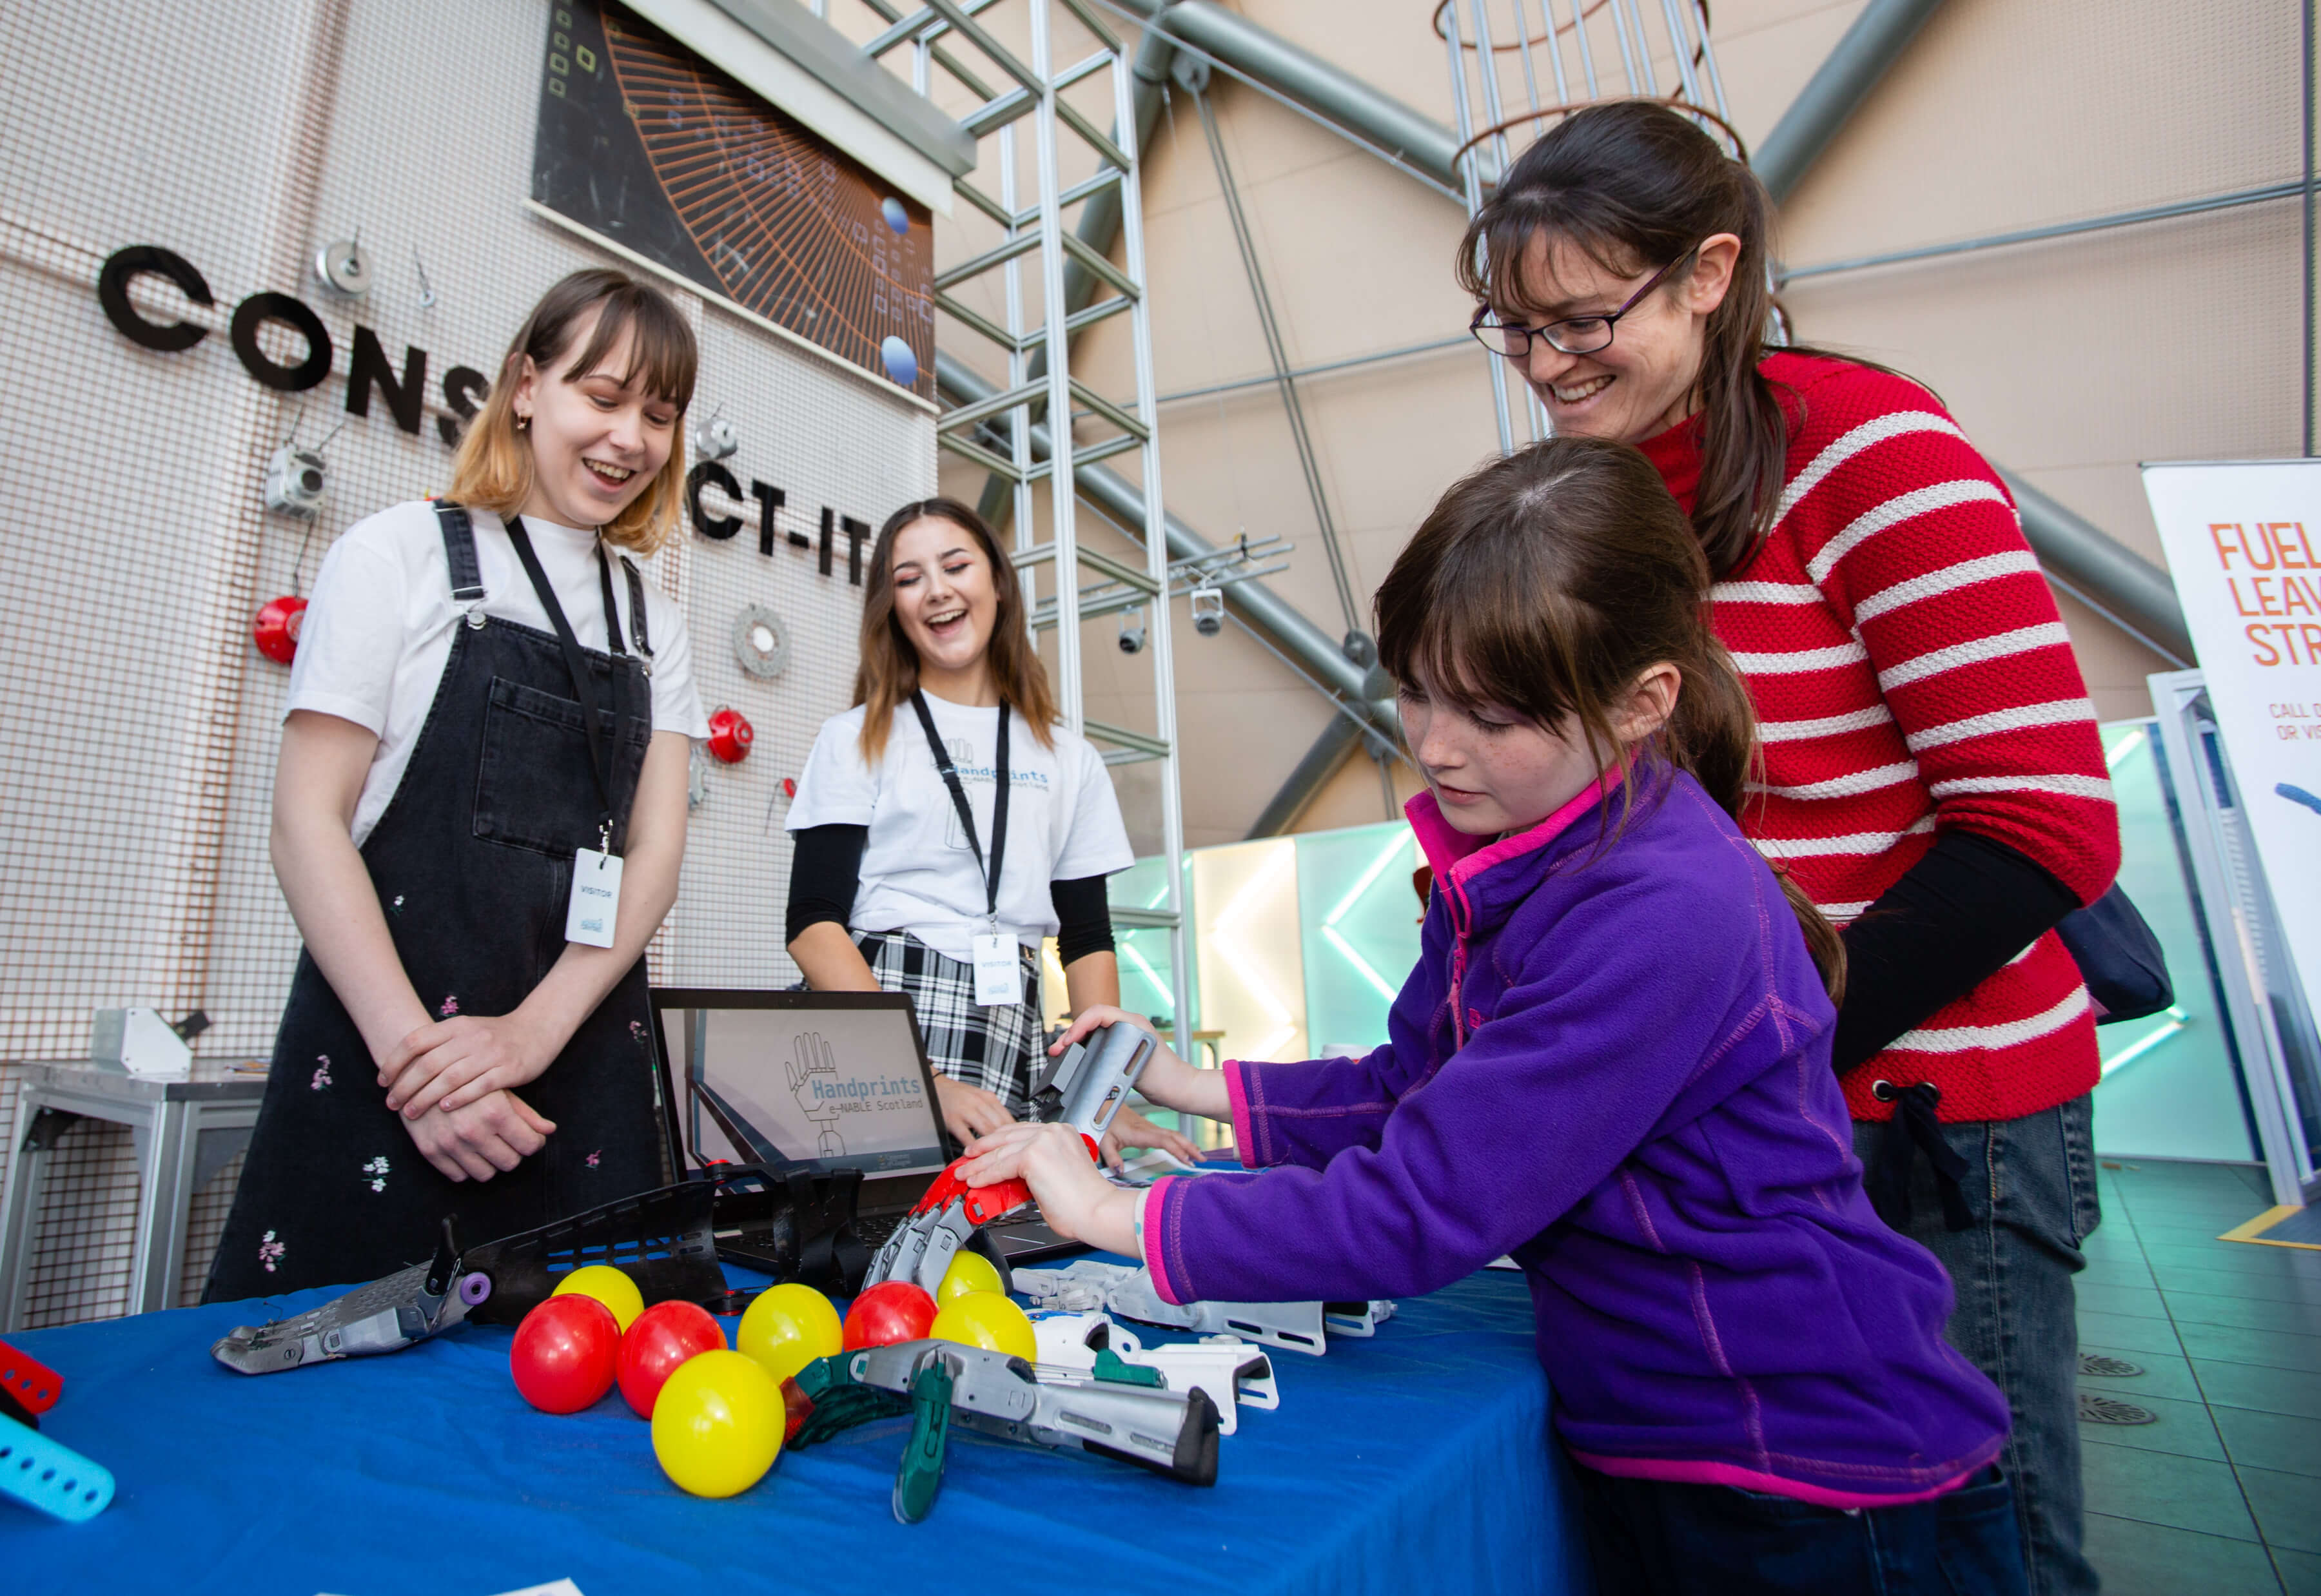 Picture showing an adult and child engaging with engineering kit at a festival stall with facilitators